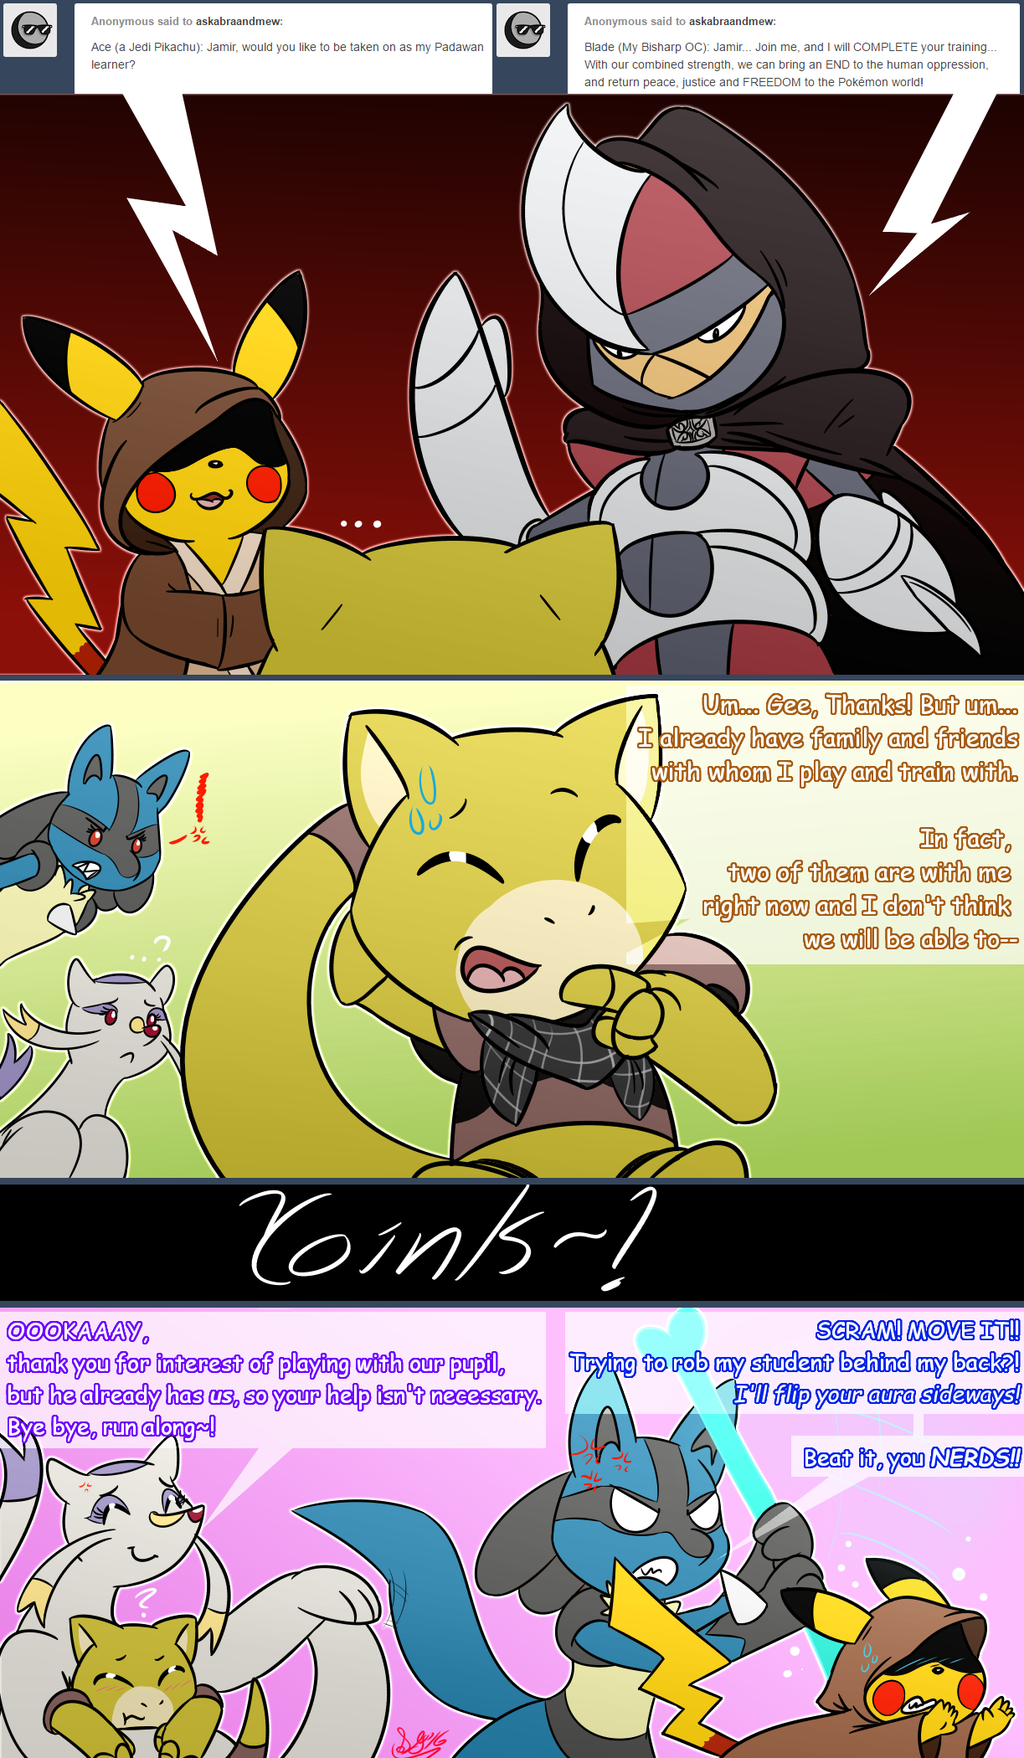 Ask Abra and Mew question #117